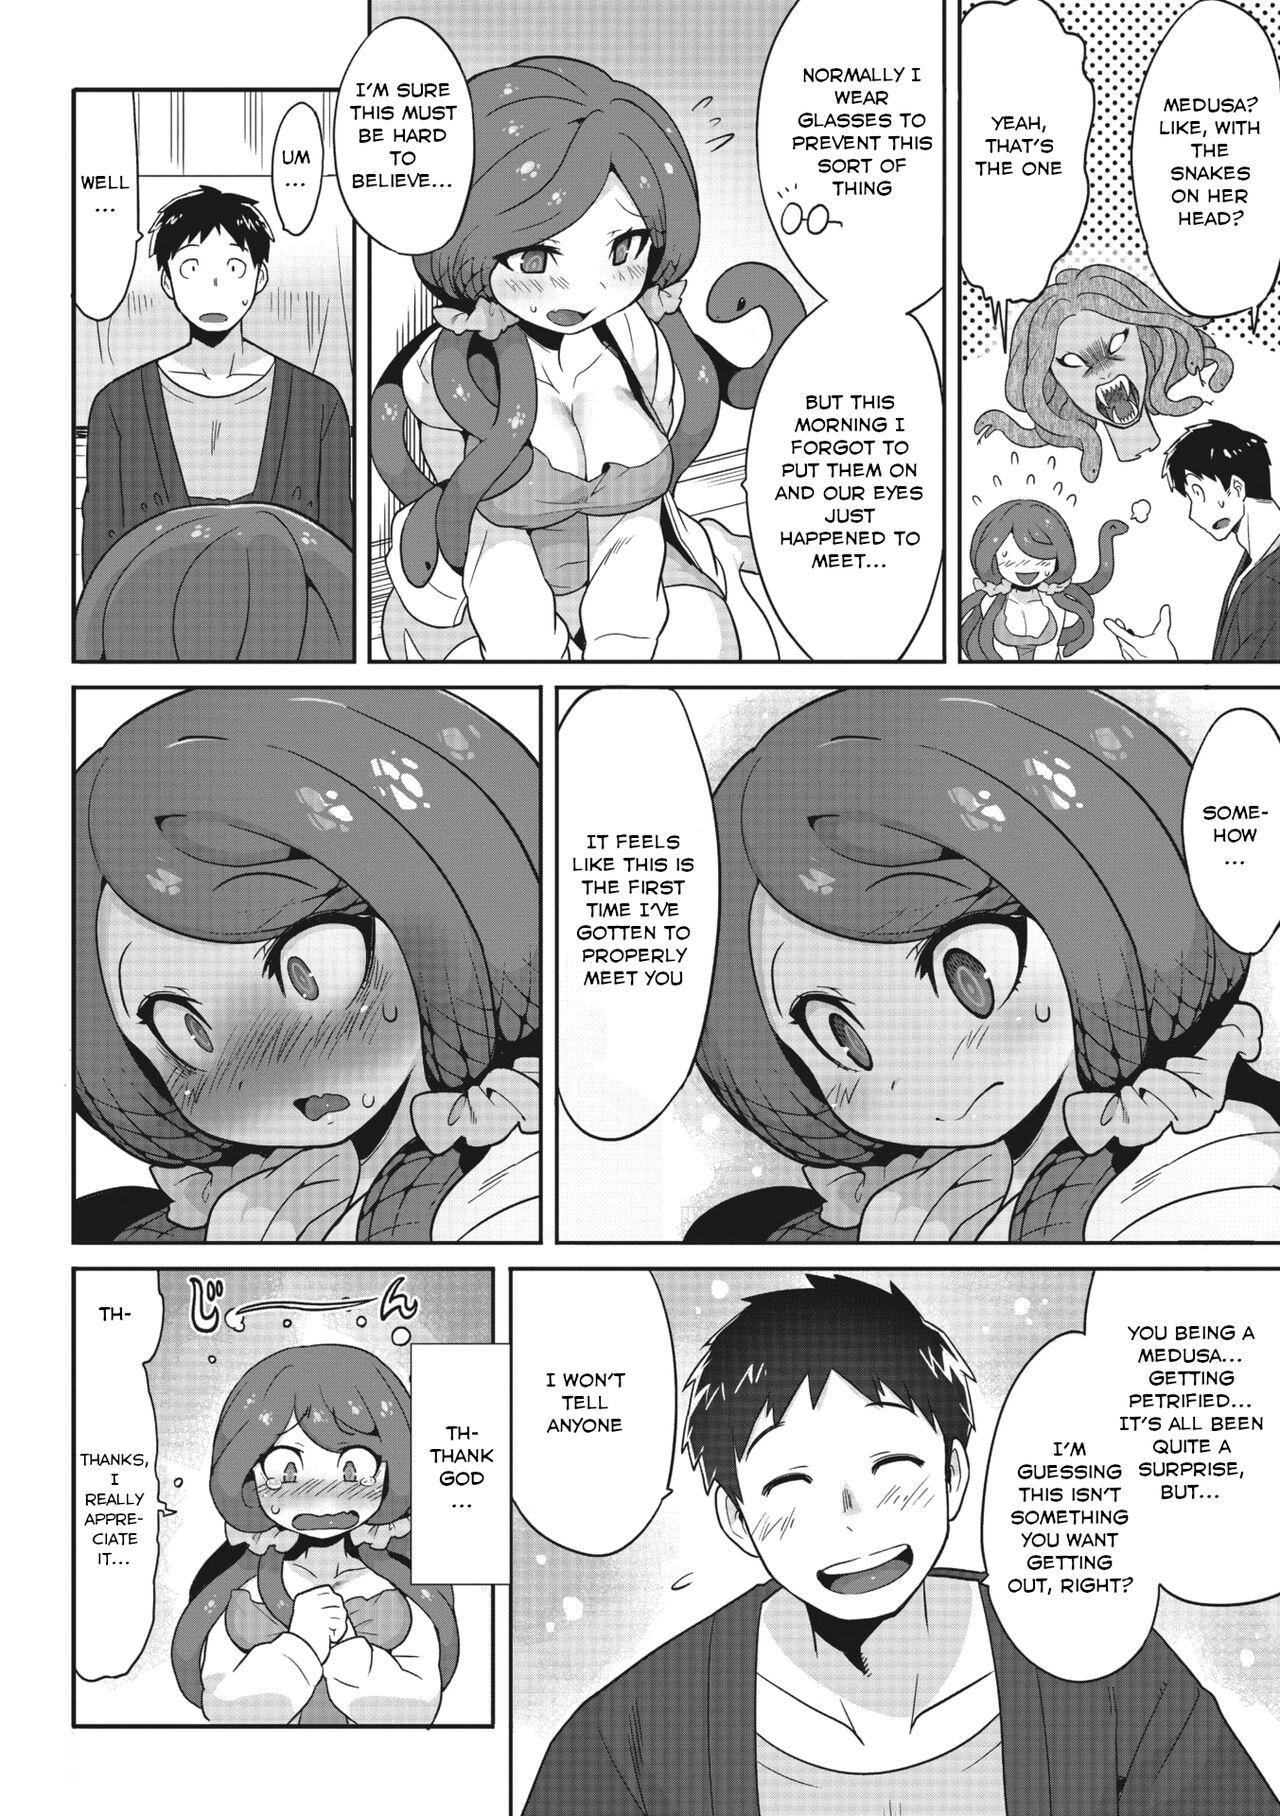 Sexteen Mitsumenaide, dakishimete. | Don't look, just hold me. Sexy - Page 6